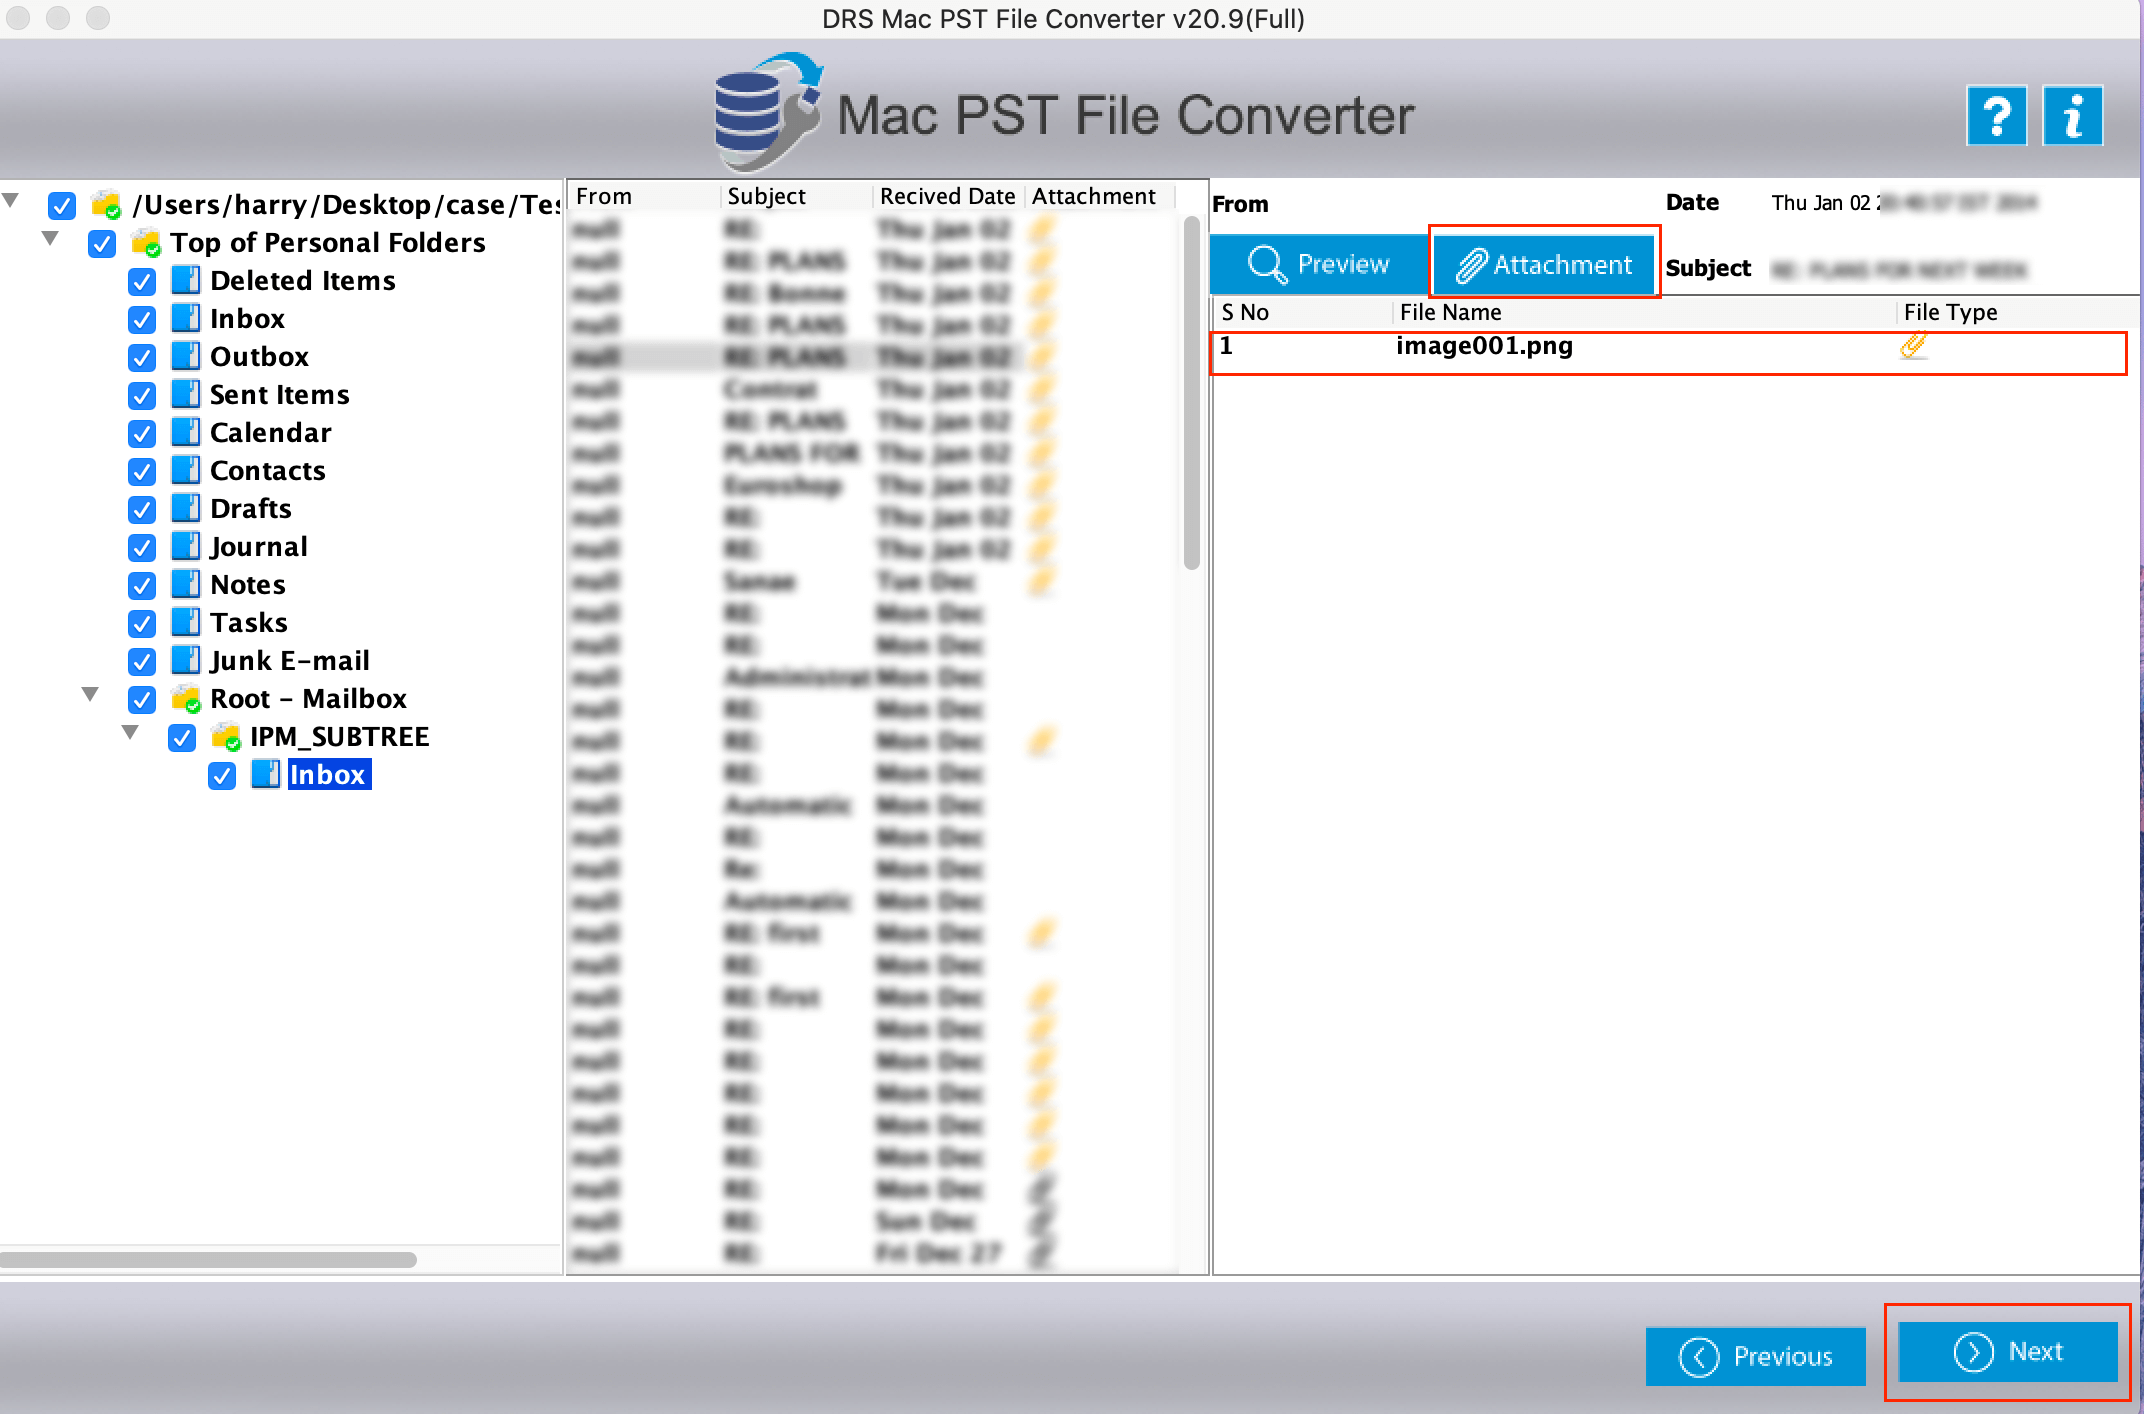 DRS PST File Converter For Mac